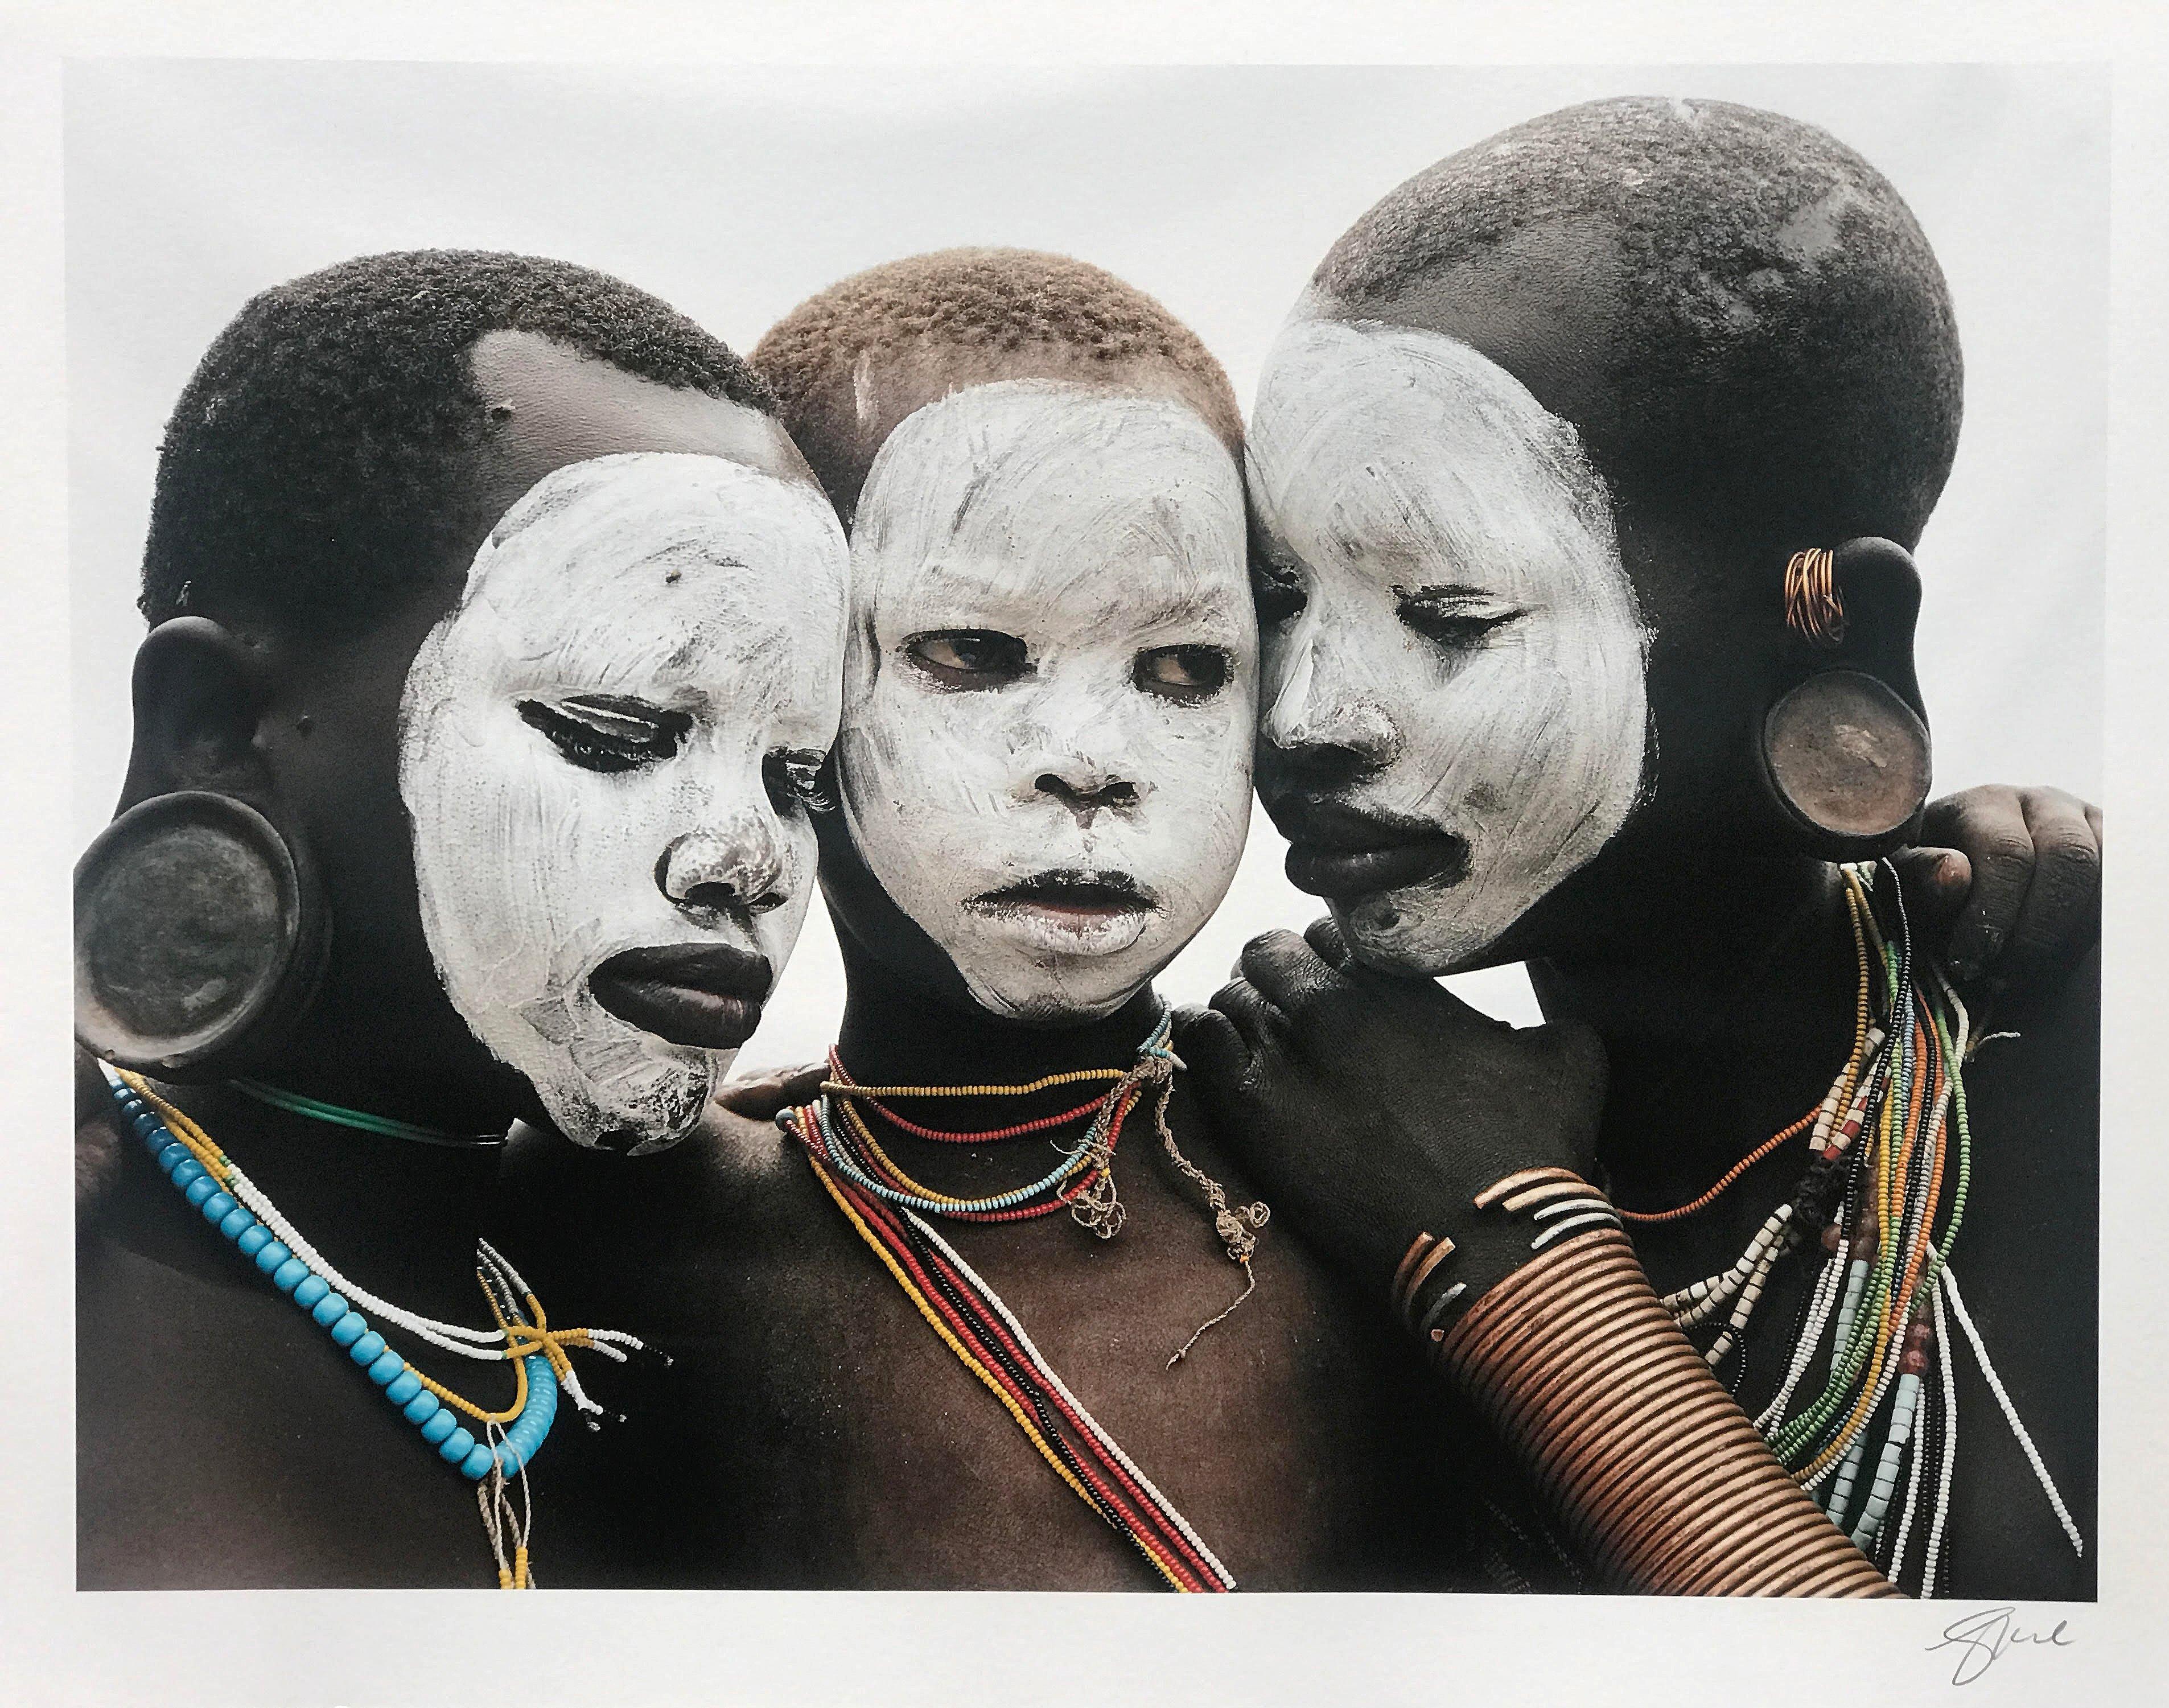 Jean-Michel Voge Portrait Photograph – Family, Nomadic Surma Tribe, Omo Valley Ethiopia, Africa, Japanese Paper Ed of 5